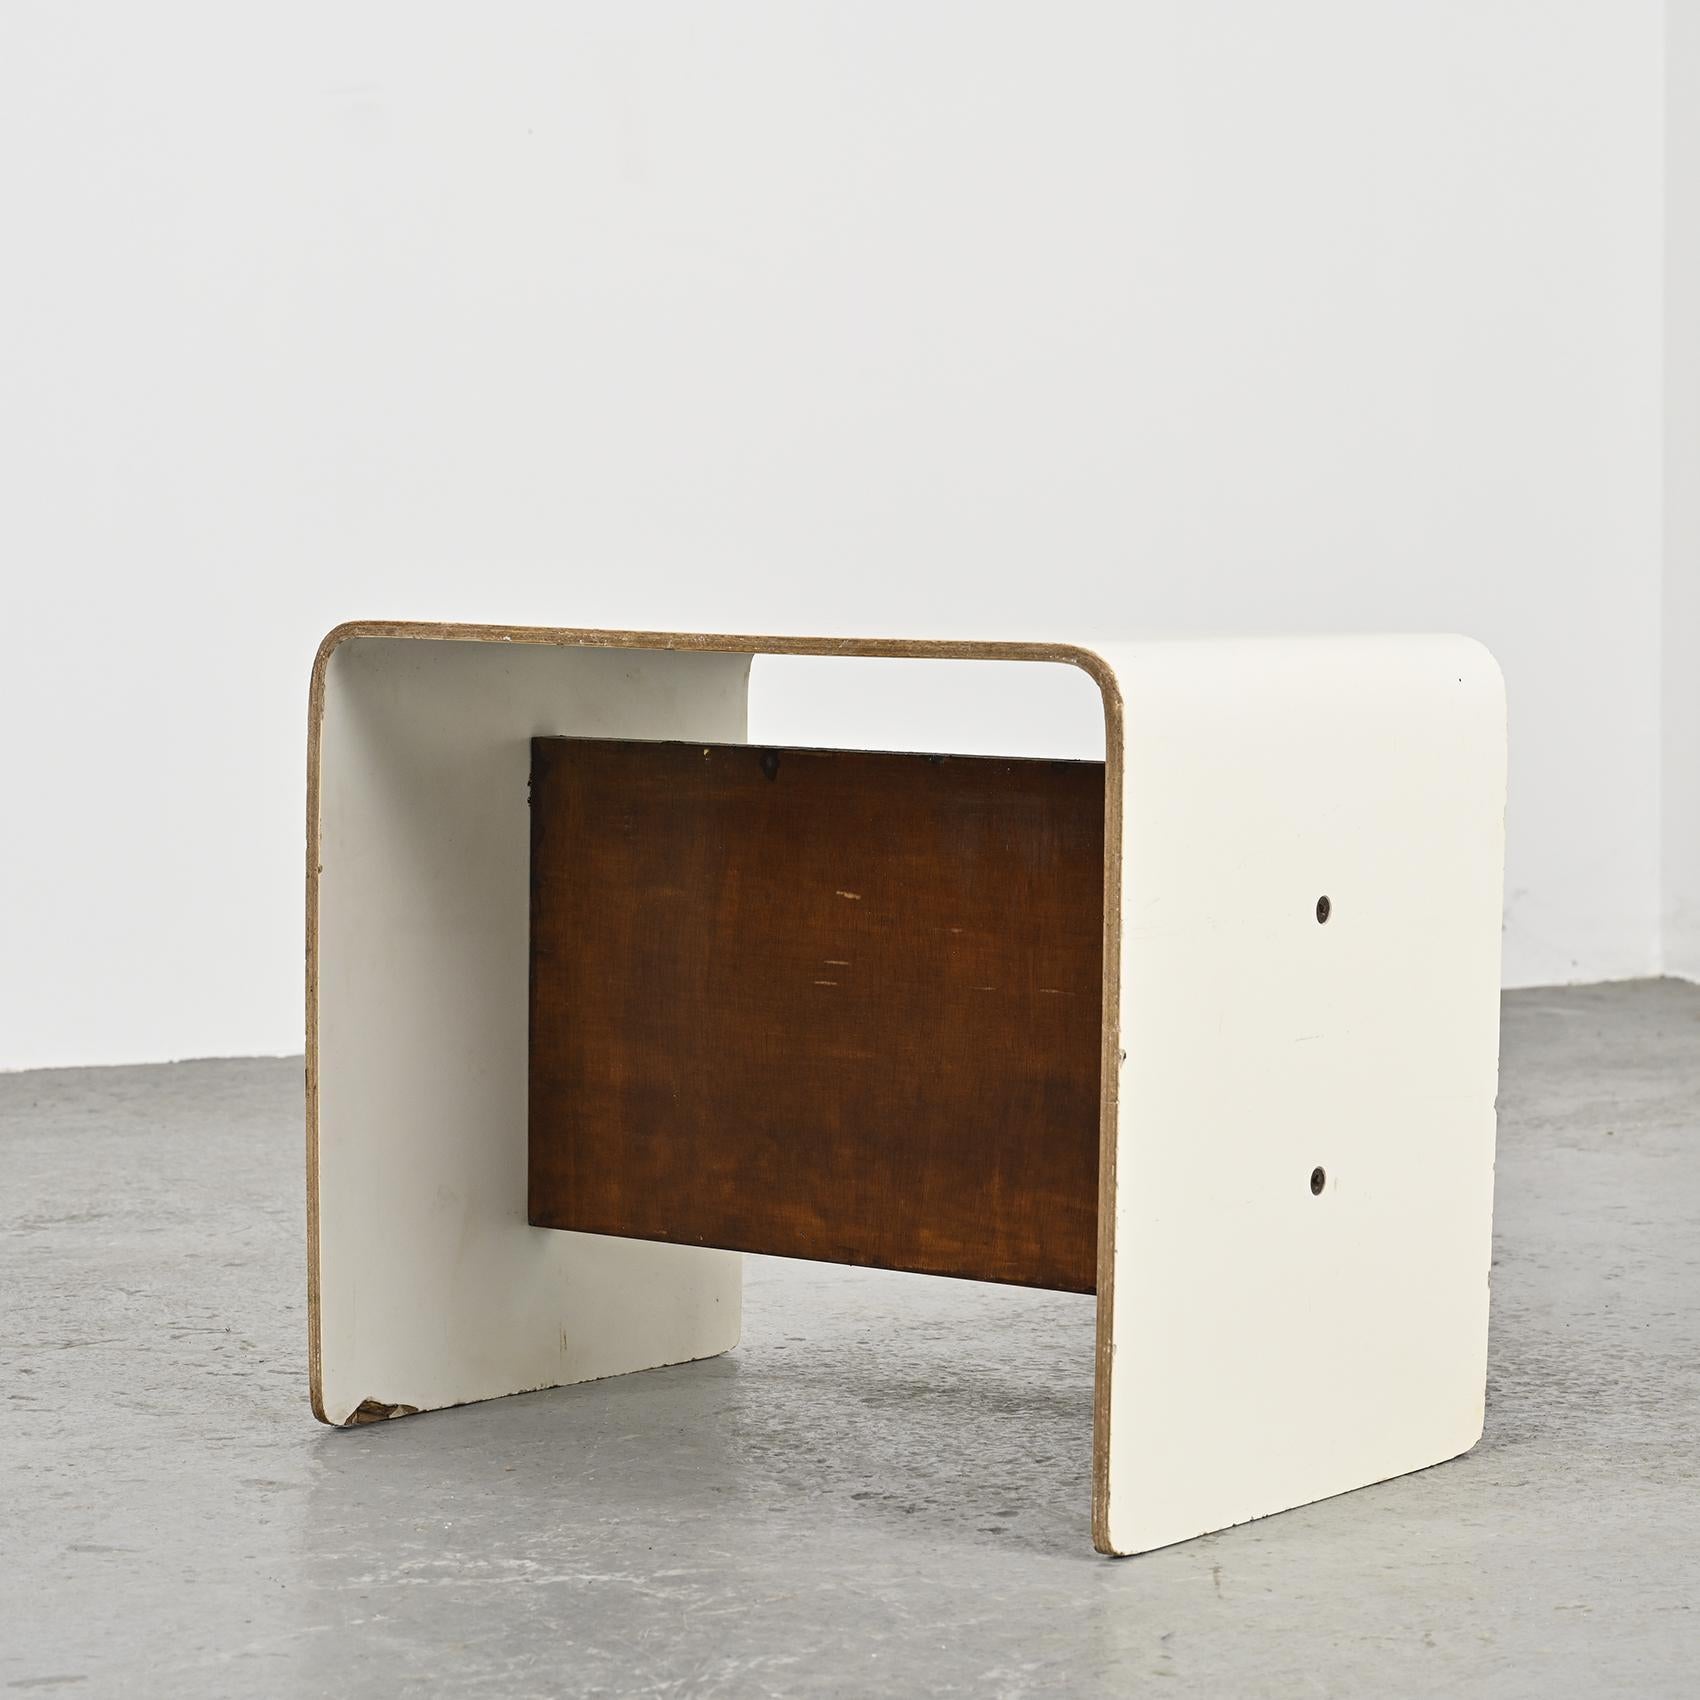  Pair of Bedside Tables by Pierre Guariche, circa 1968 For Sale 2